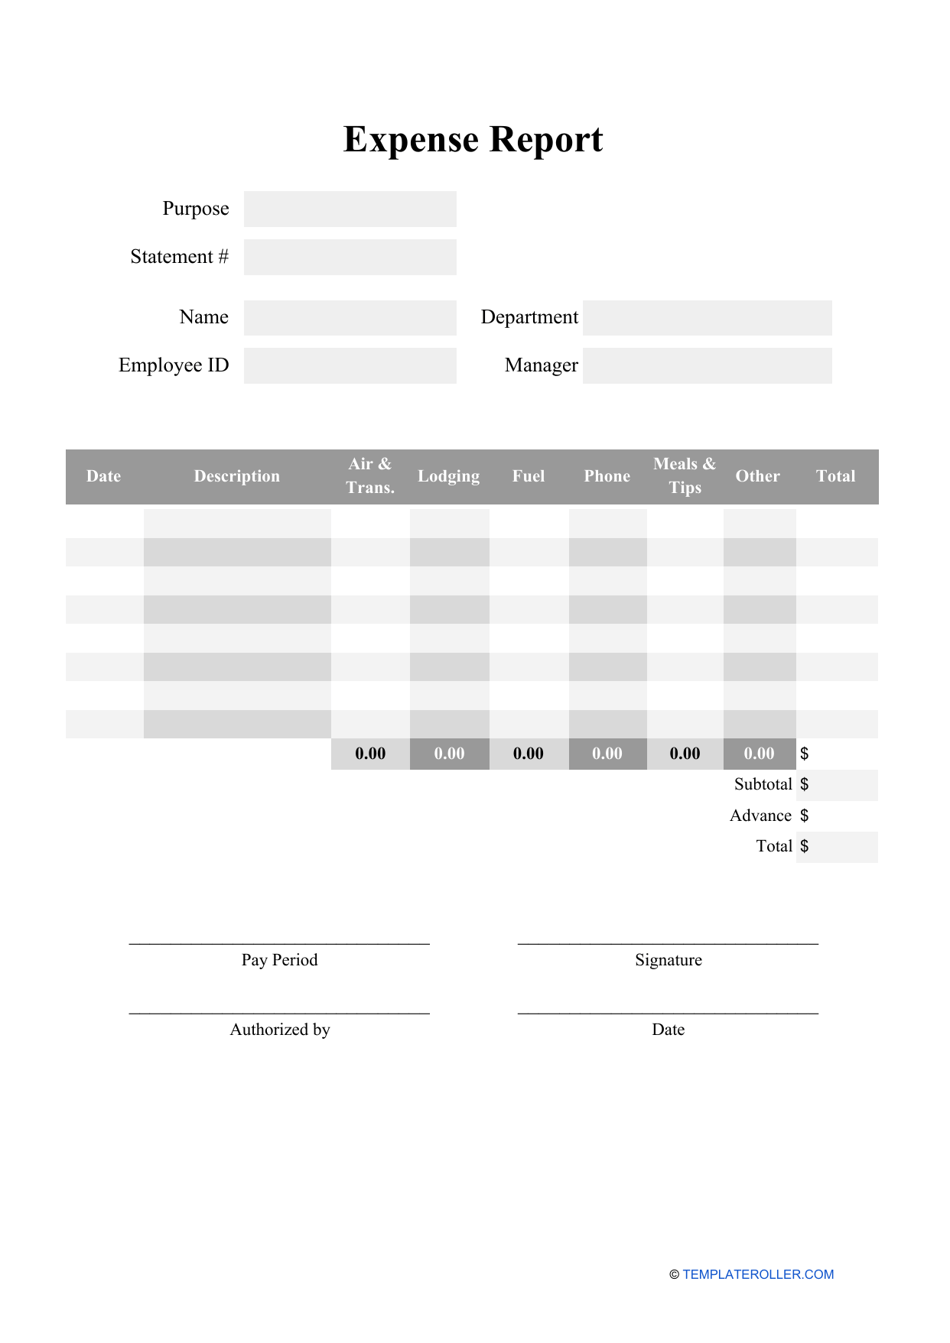 Expense Report Template, Page 1